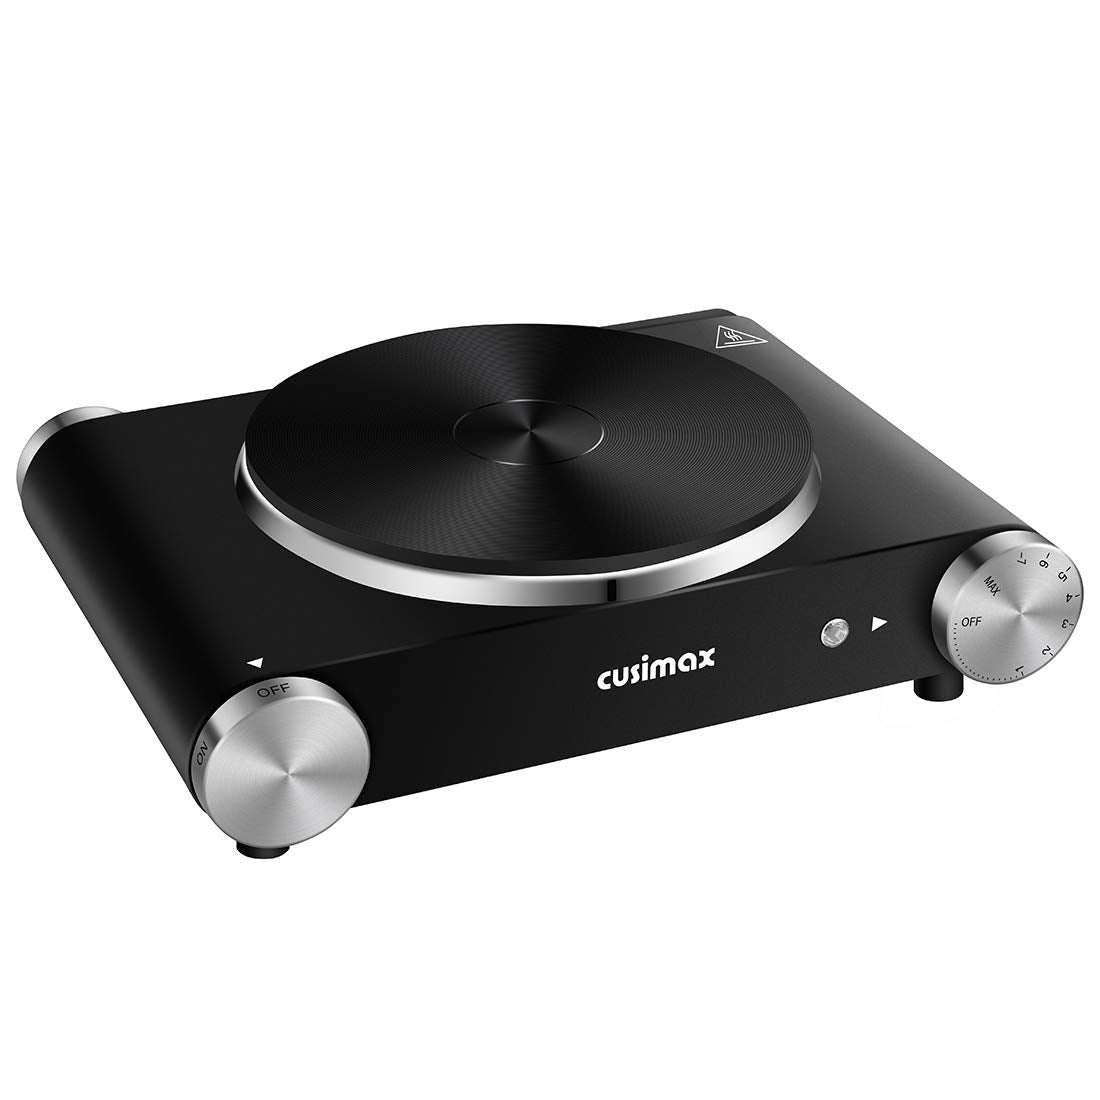 CUSIMAX Electric Hot Plate for Cooking Portable Single Burner 1500W Cast Iron hot plates Heat-up in Seconds Adjustable Temperature Control Stainless Steel Non